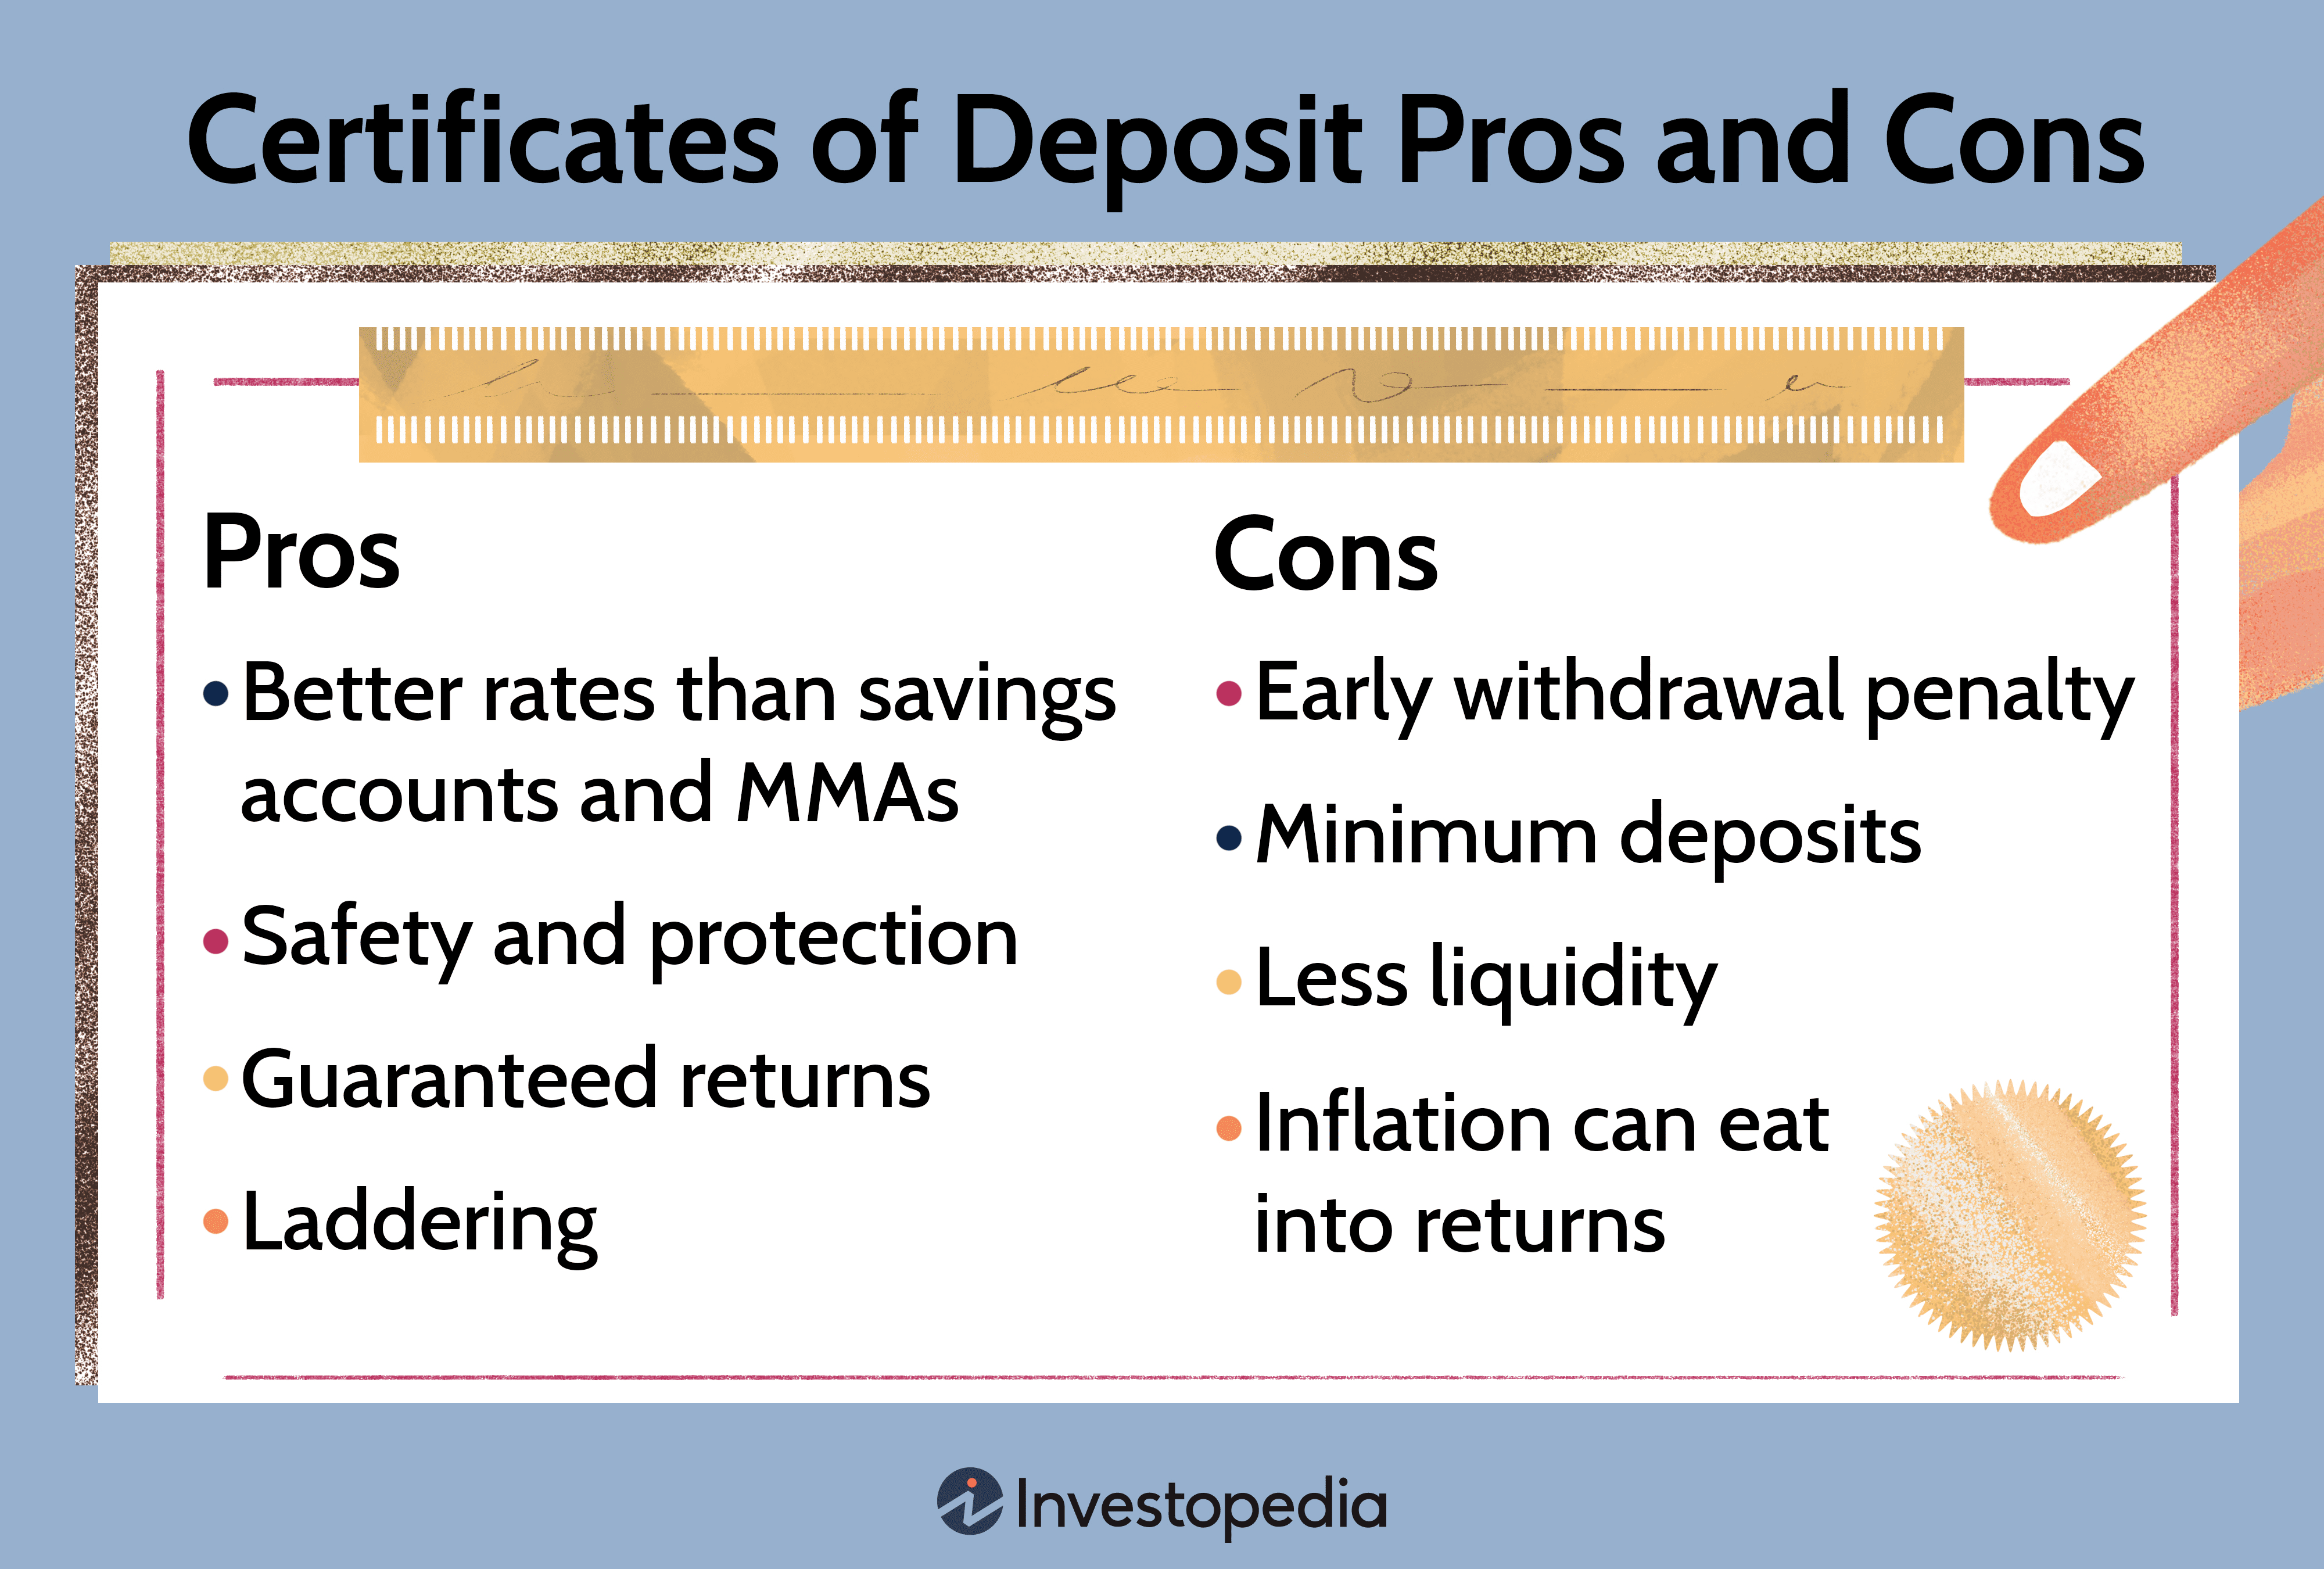 Certificates of Deposit Pros and Cons